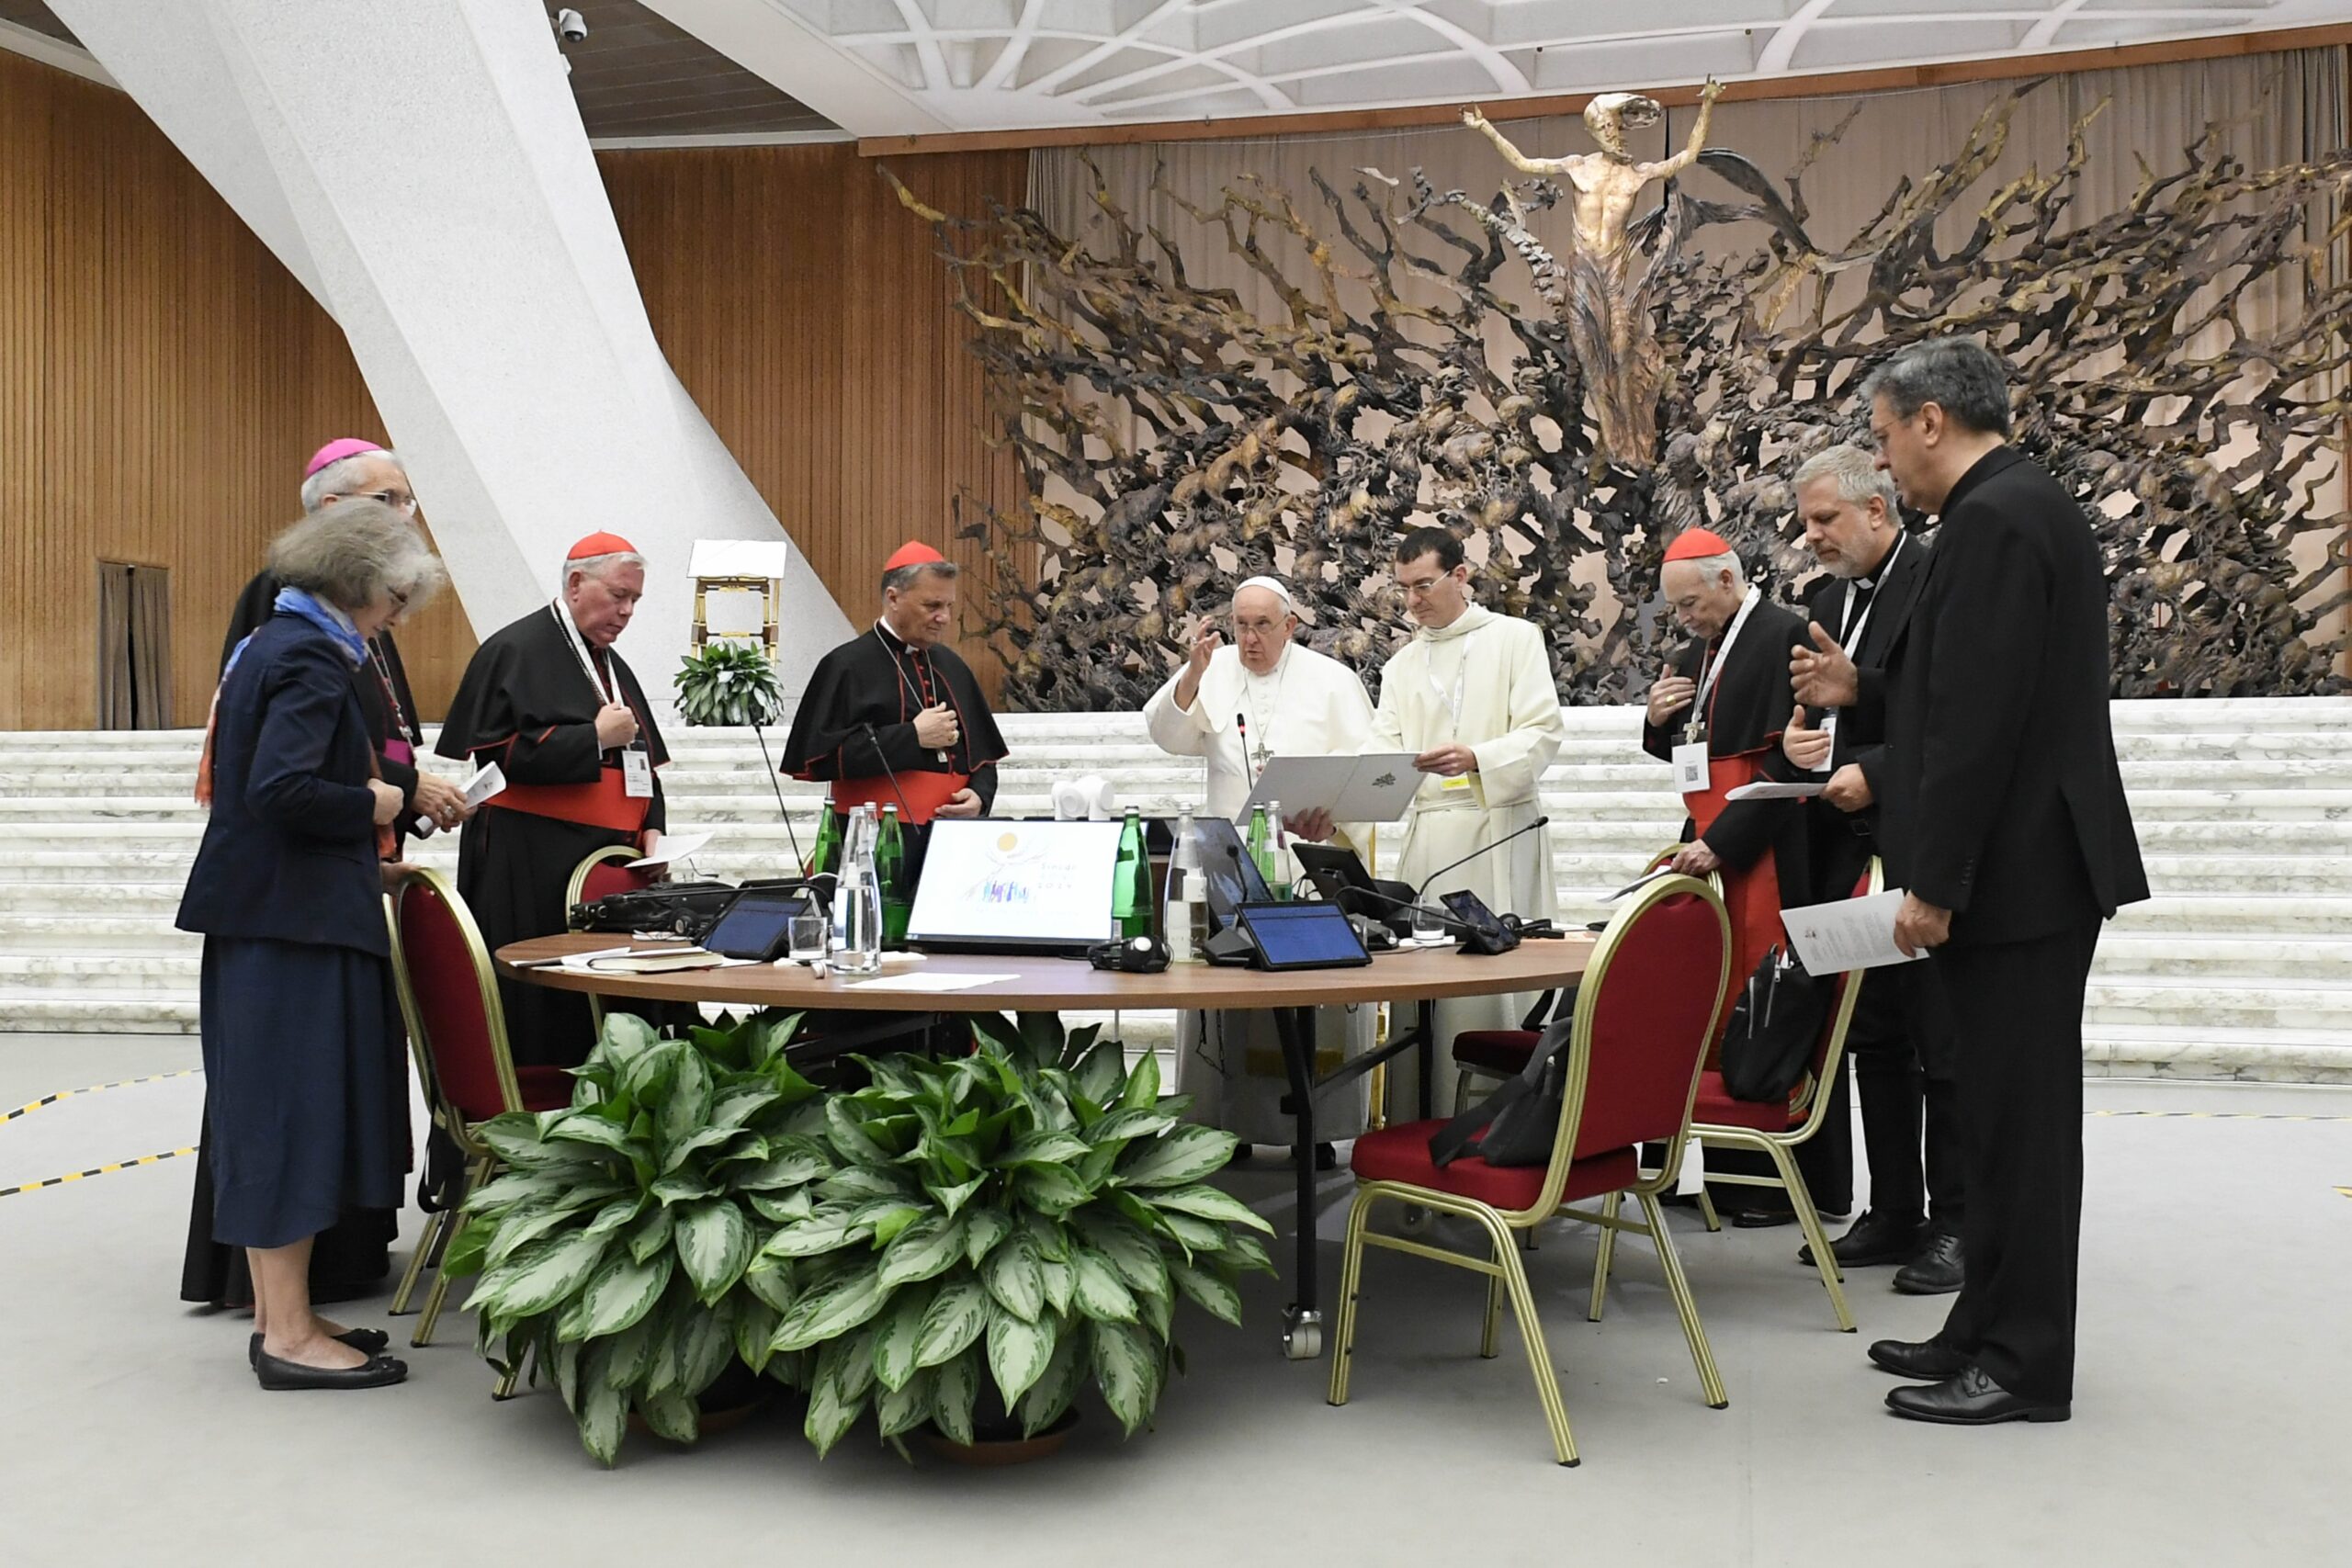 Pope Francis gives his blessing at the conclusion of the assembly of the Synod of Bishops' last working session Oct. 28, 2023, in the Paul VI Hall at the Vatican. (CNS photo/Vatican Media)